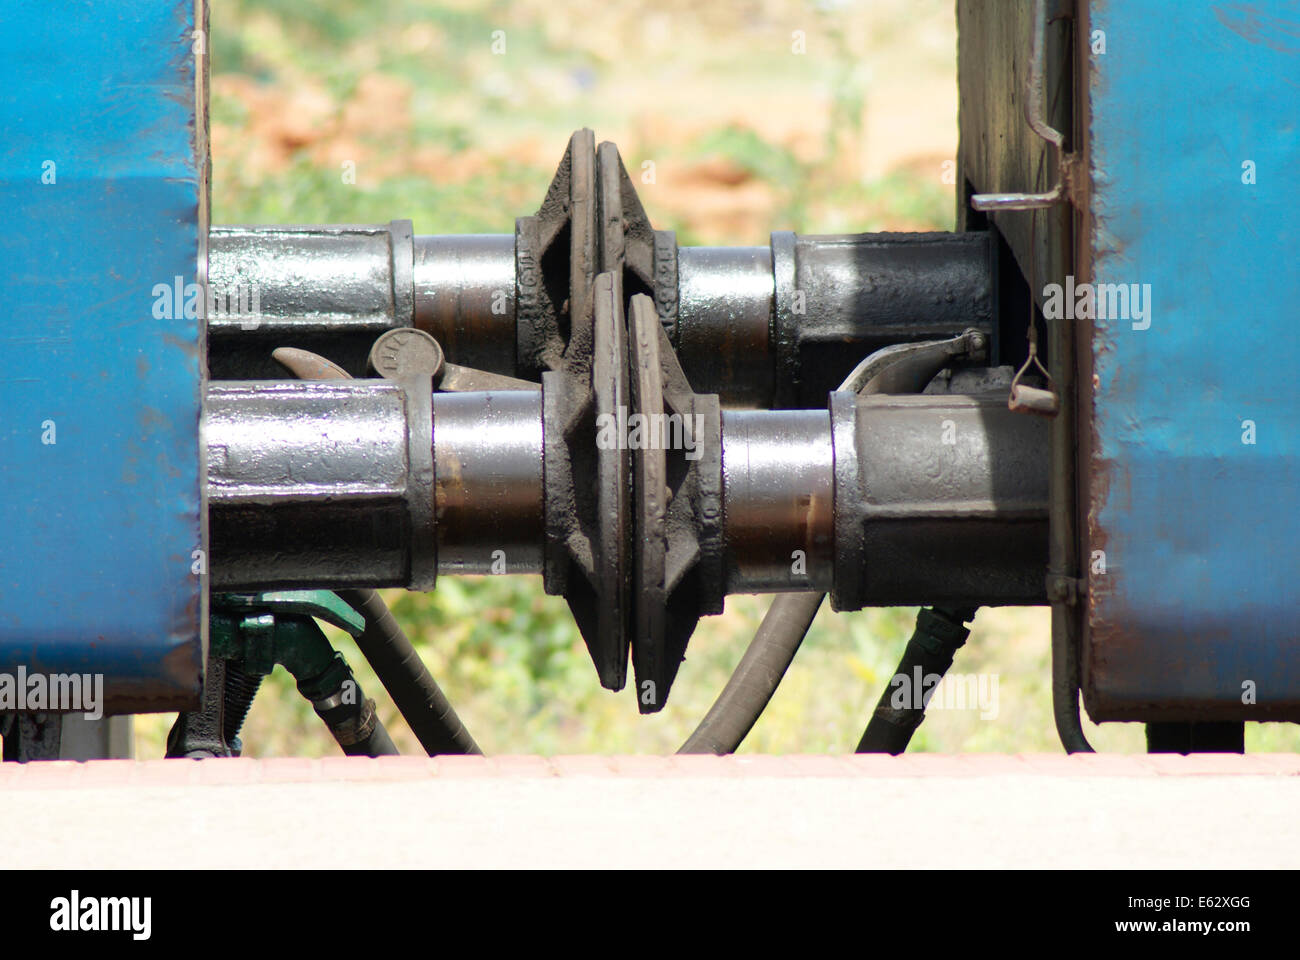 Train in shunting mode Chain Buffer coupler detail Coupling View at Indian Railway India Stock Photo